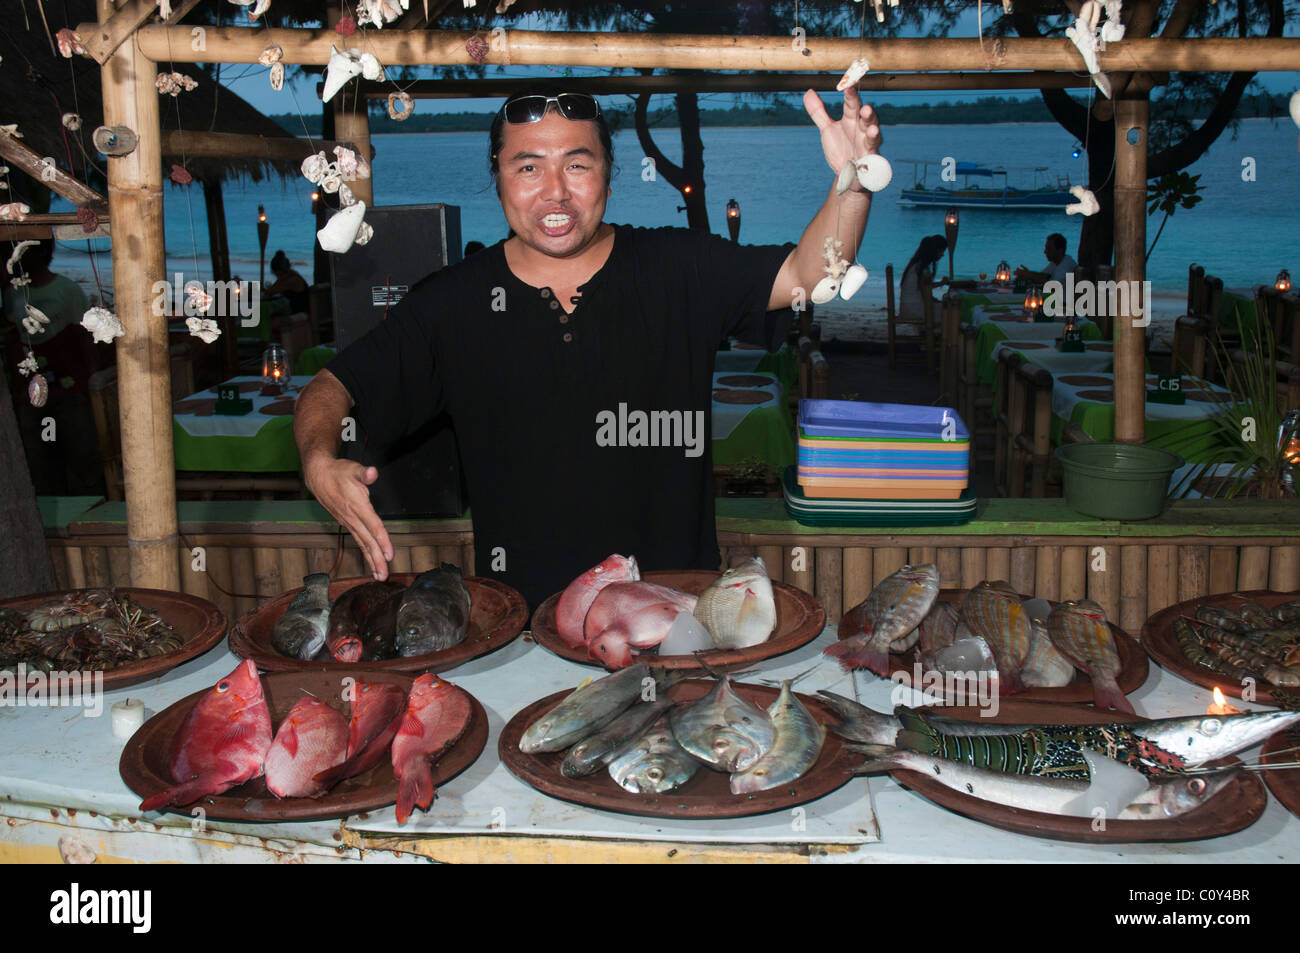 An extroverted restaurateur displays his wares at a seafood restaurant on the island of Gili Trawangan near Lombok Indonesia Stock Photo